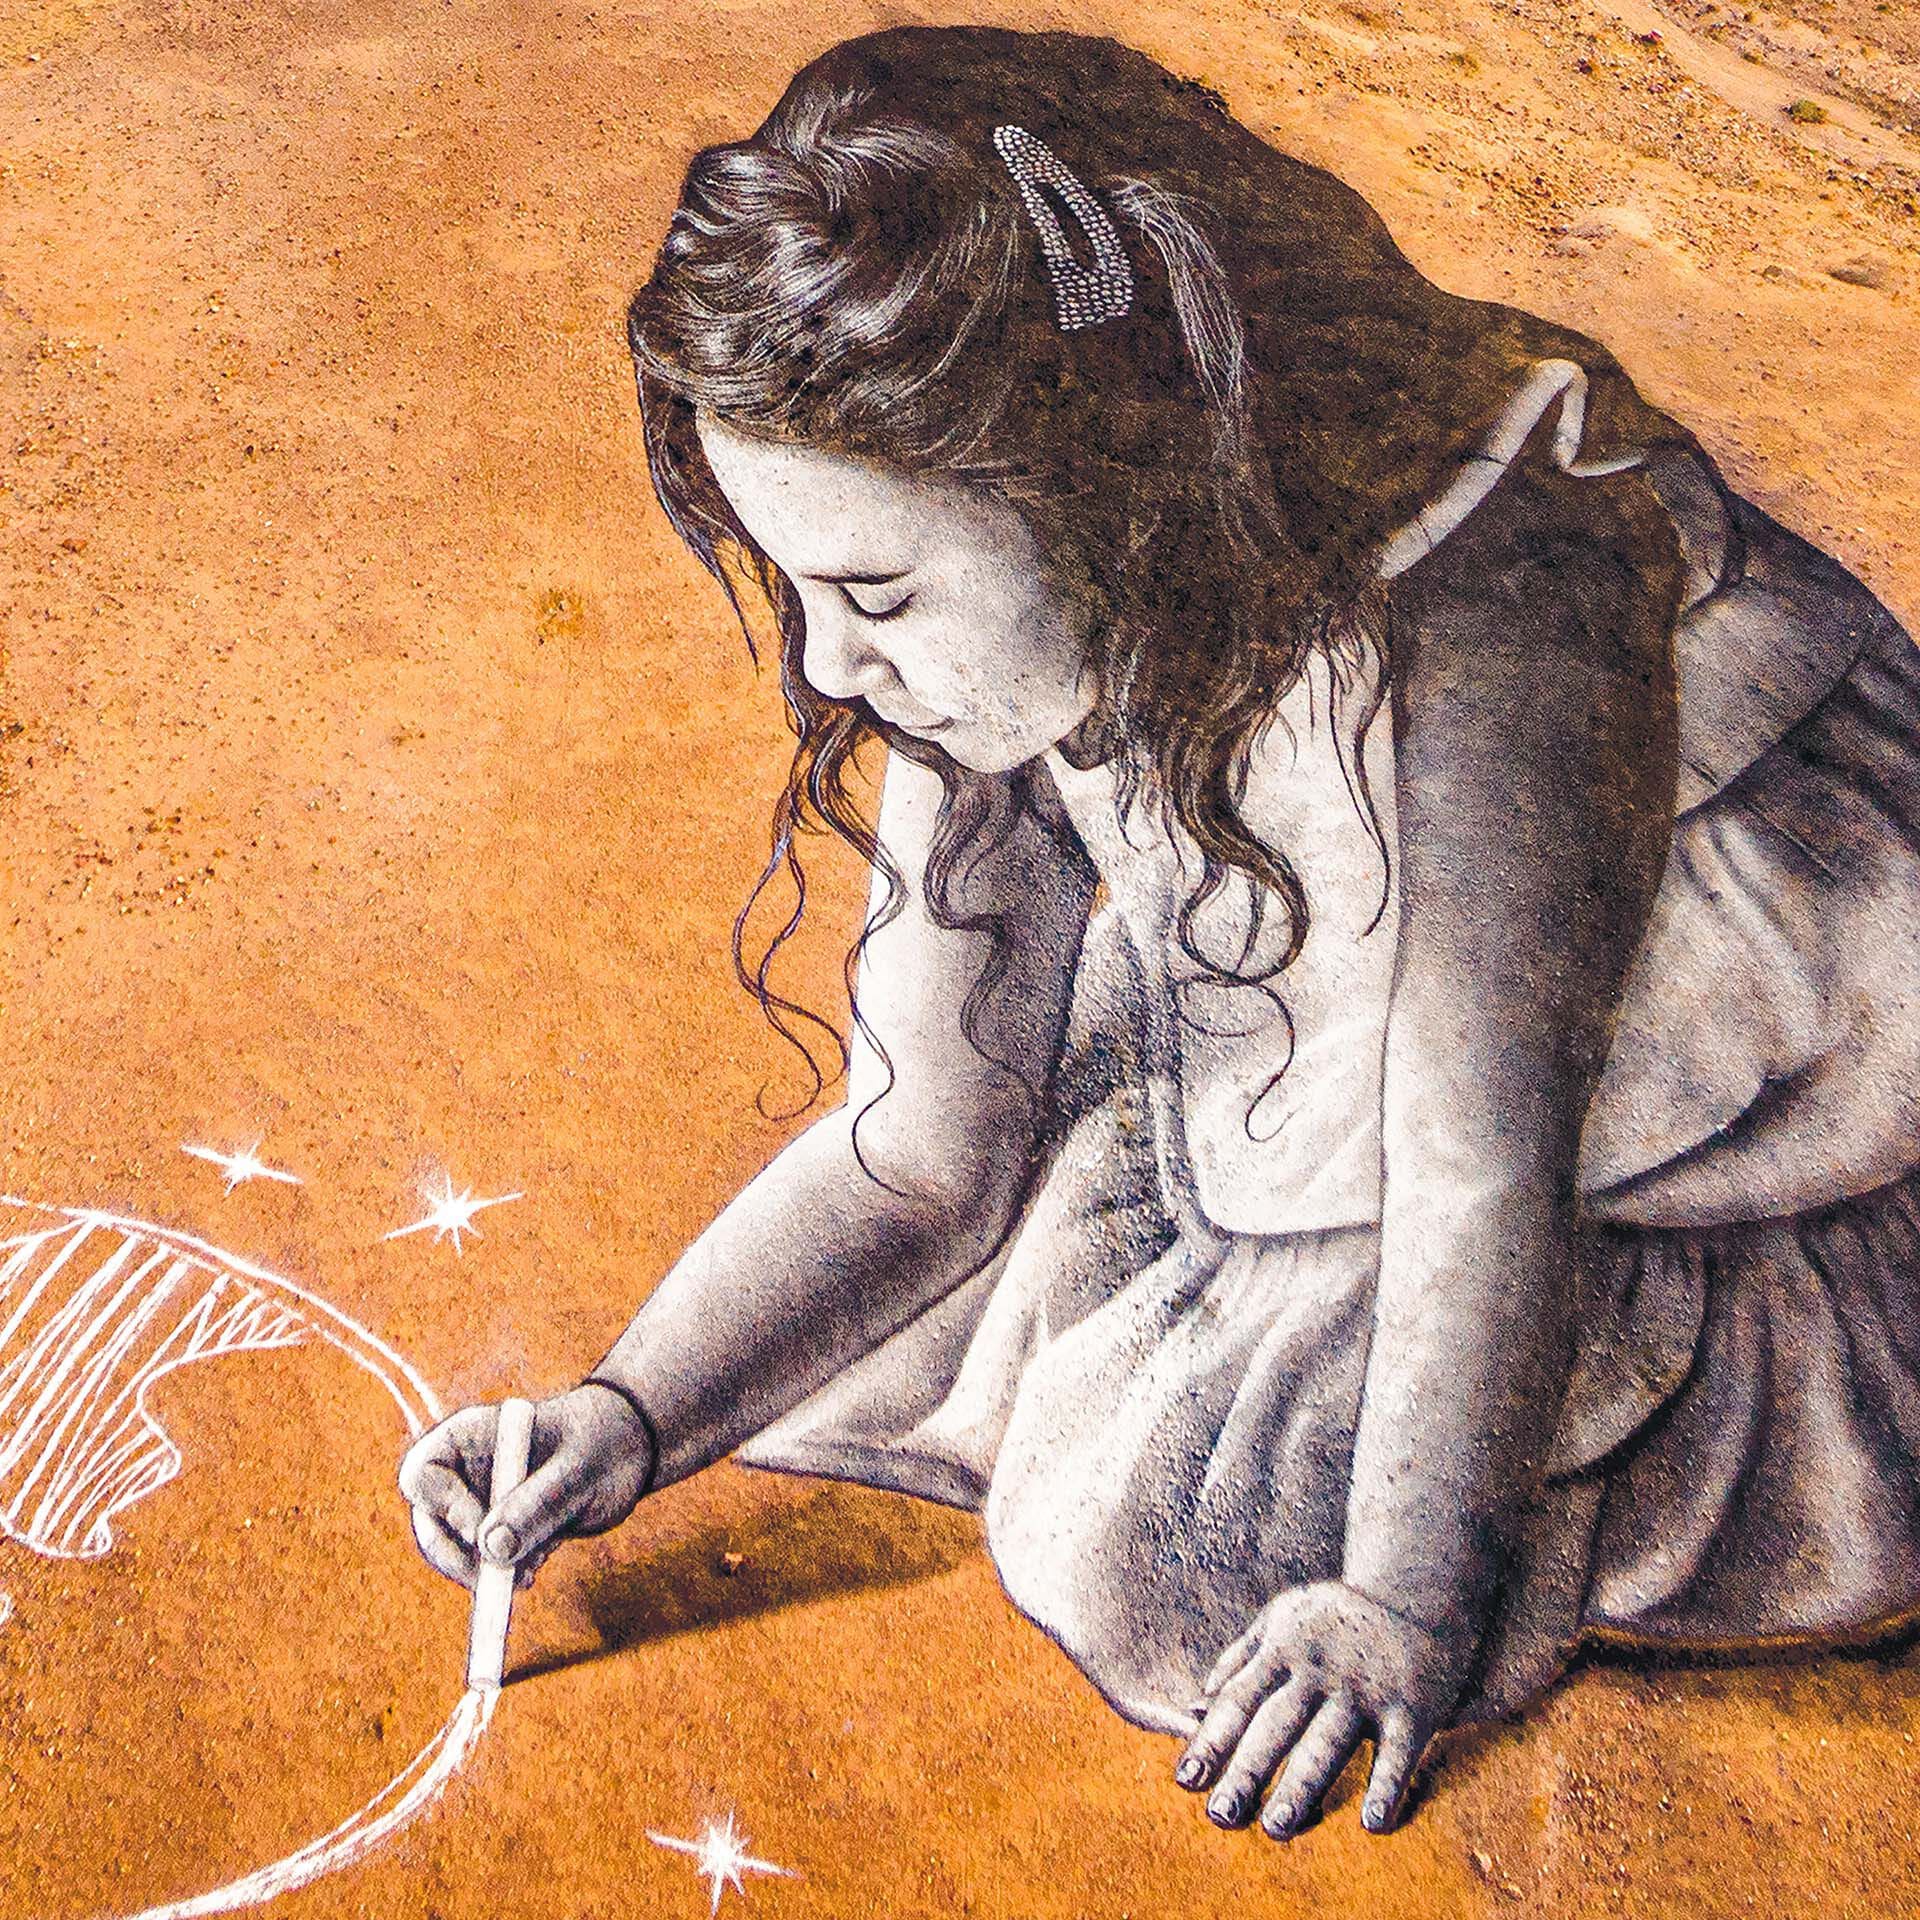 Painting representing a little girl drawn by Saype